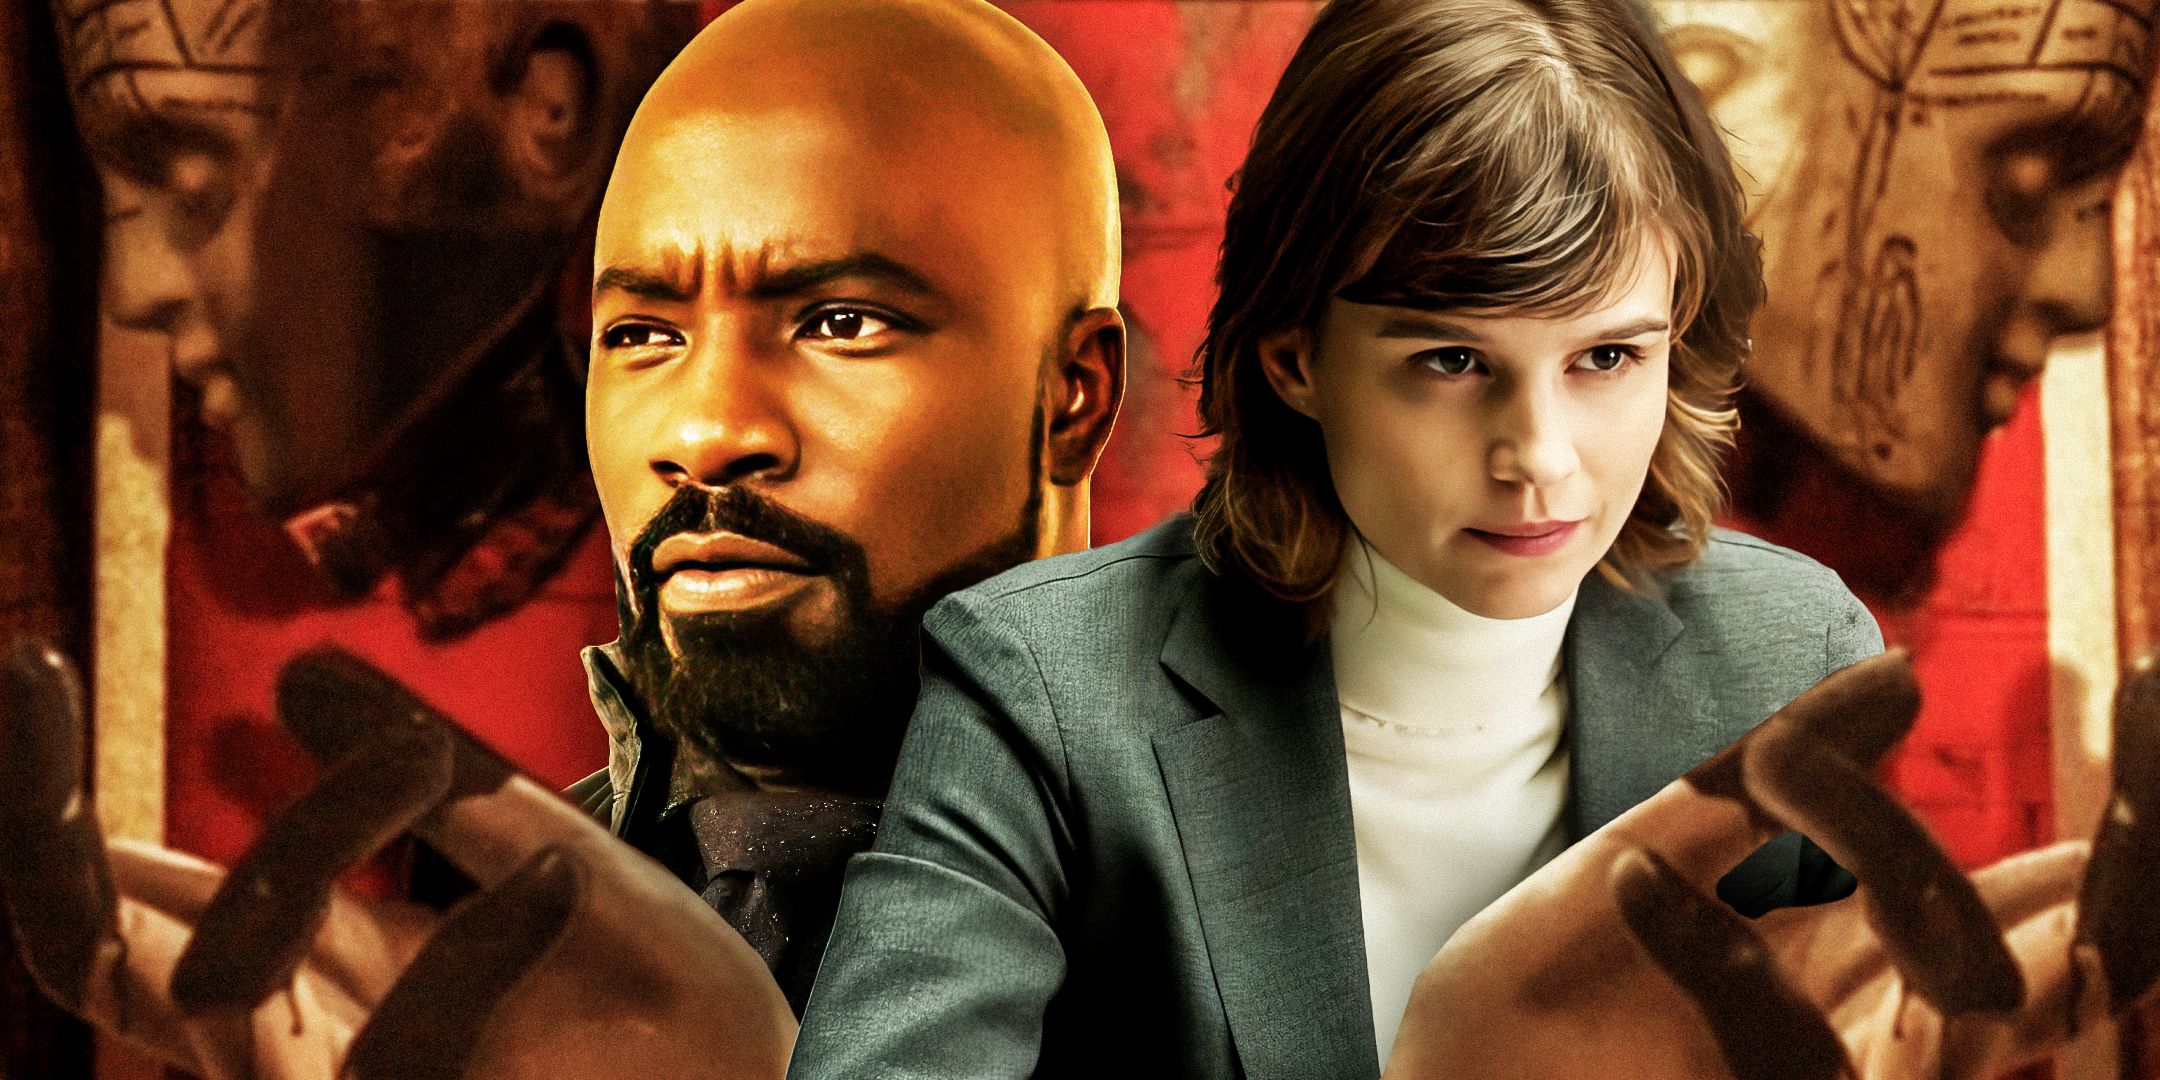 Katja Herbers as Kristen Bouchard and Mike Colter as David Acosta from Evil